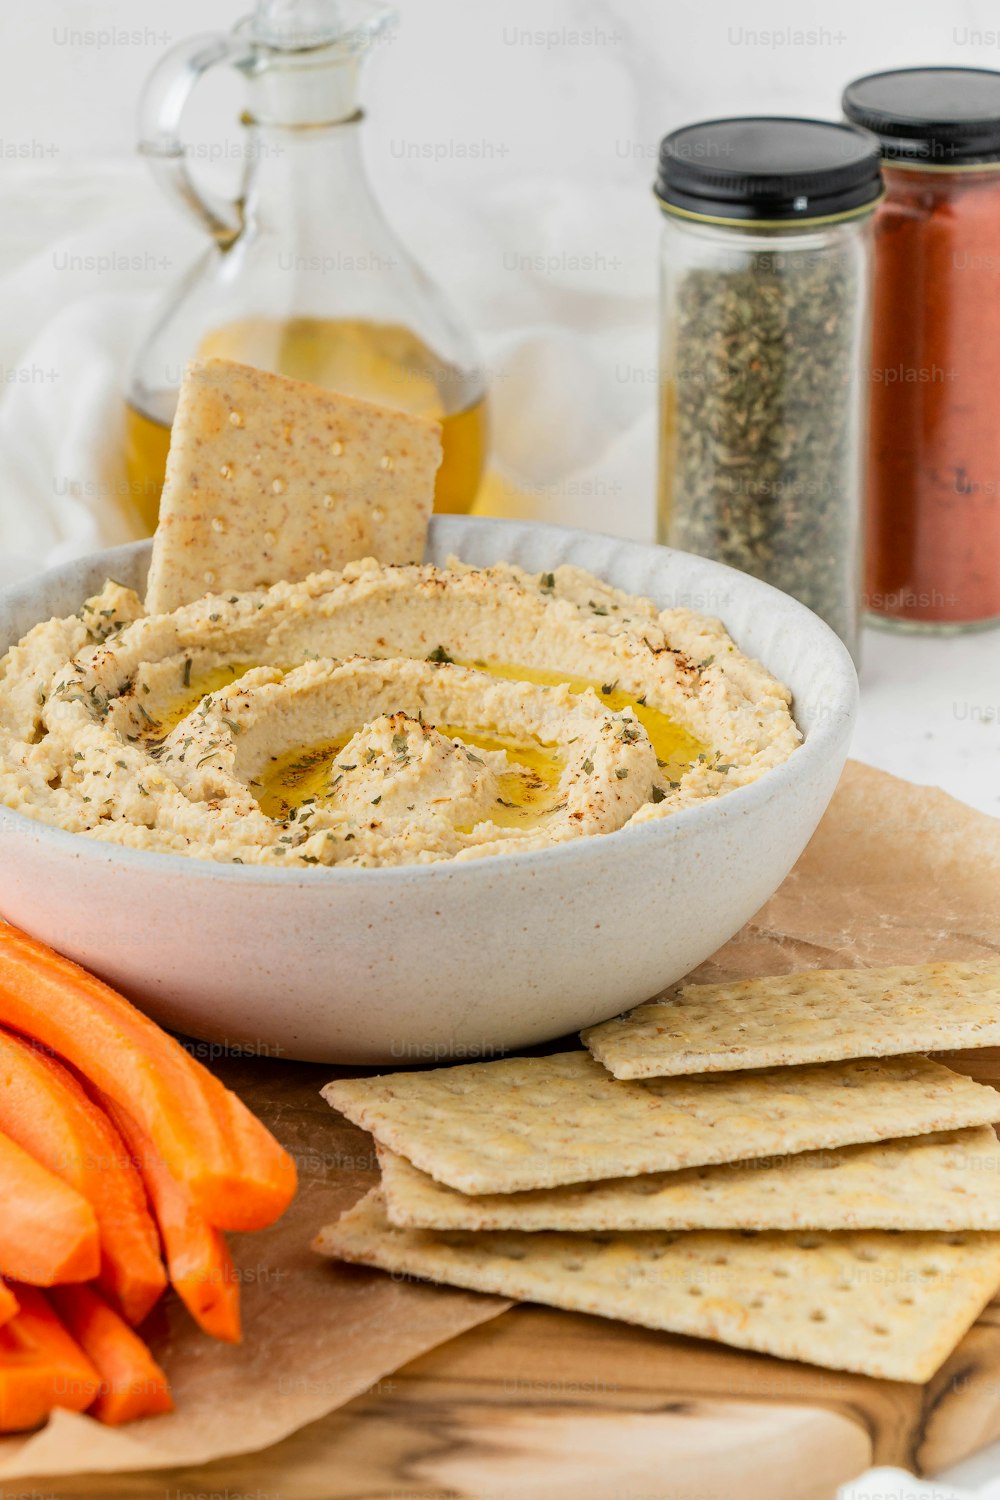 a bowl of hummus, crackers, and carrots on a cutting board